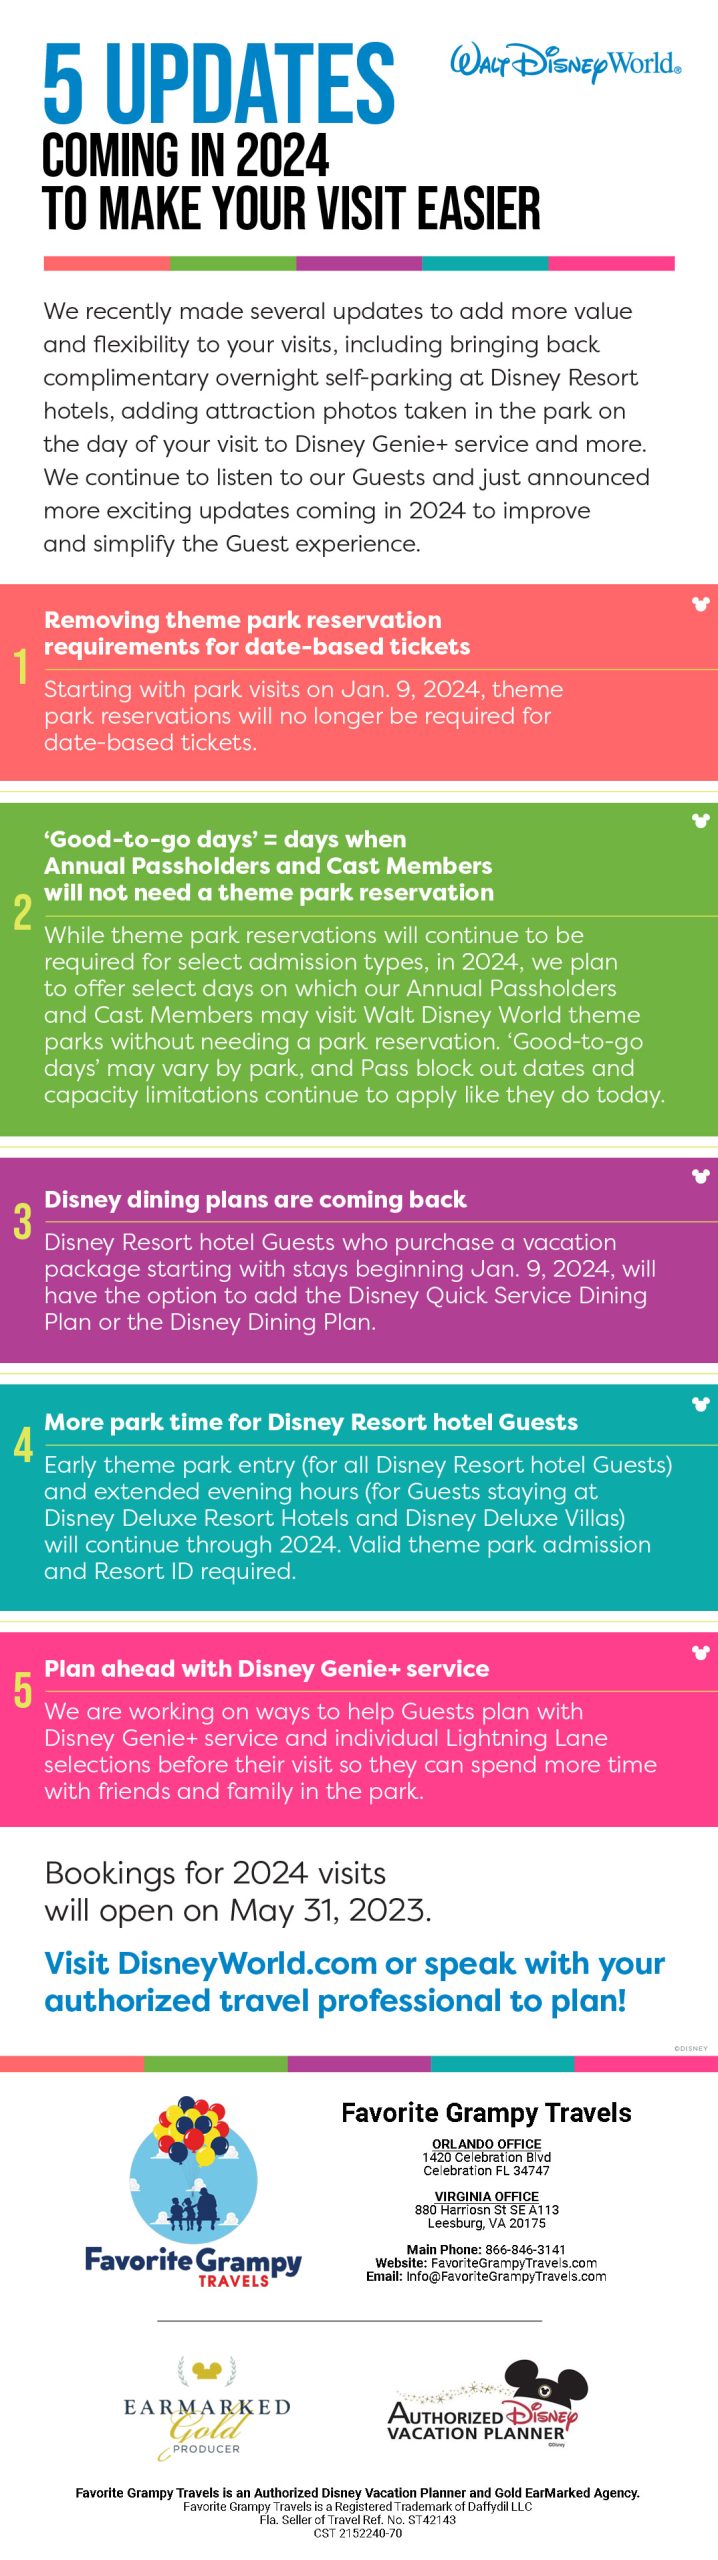 5 Updates to Make Your Disney World Vacation Easier in 2024 Infographic